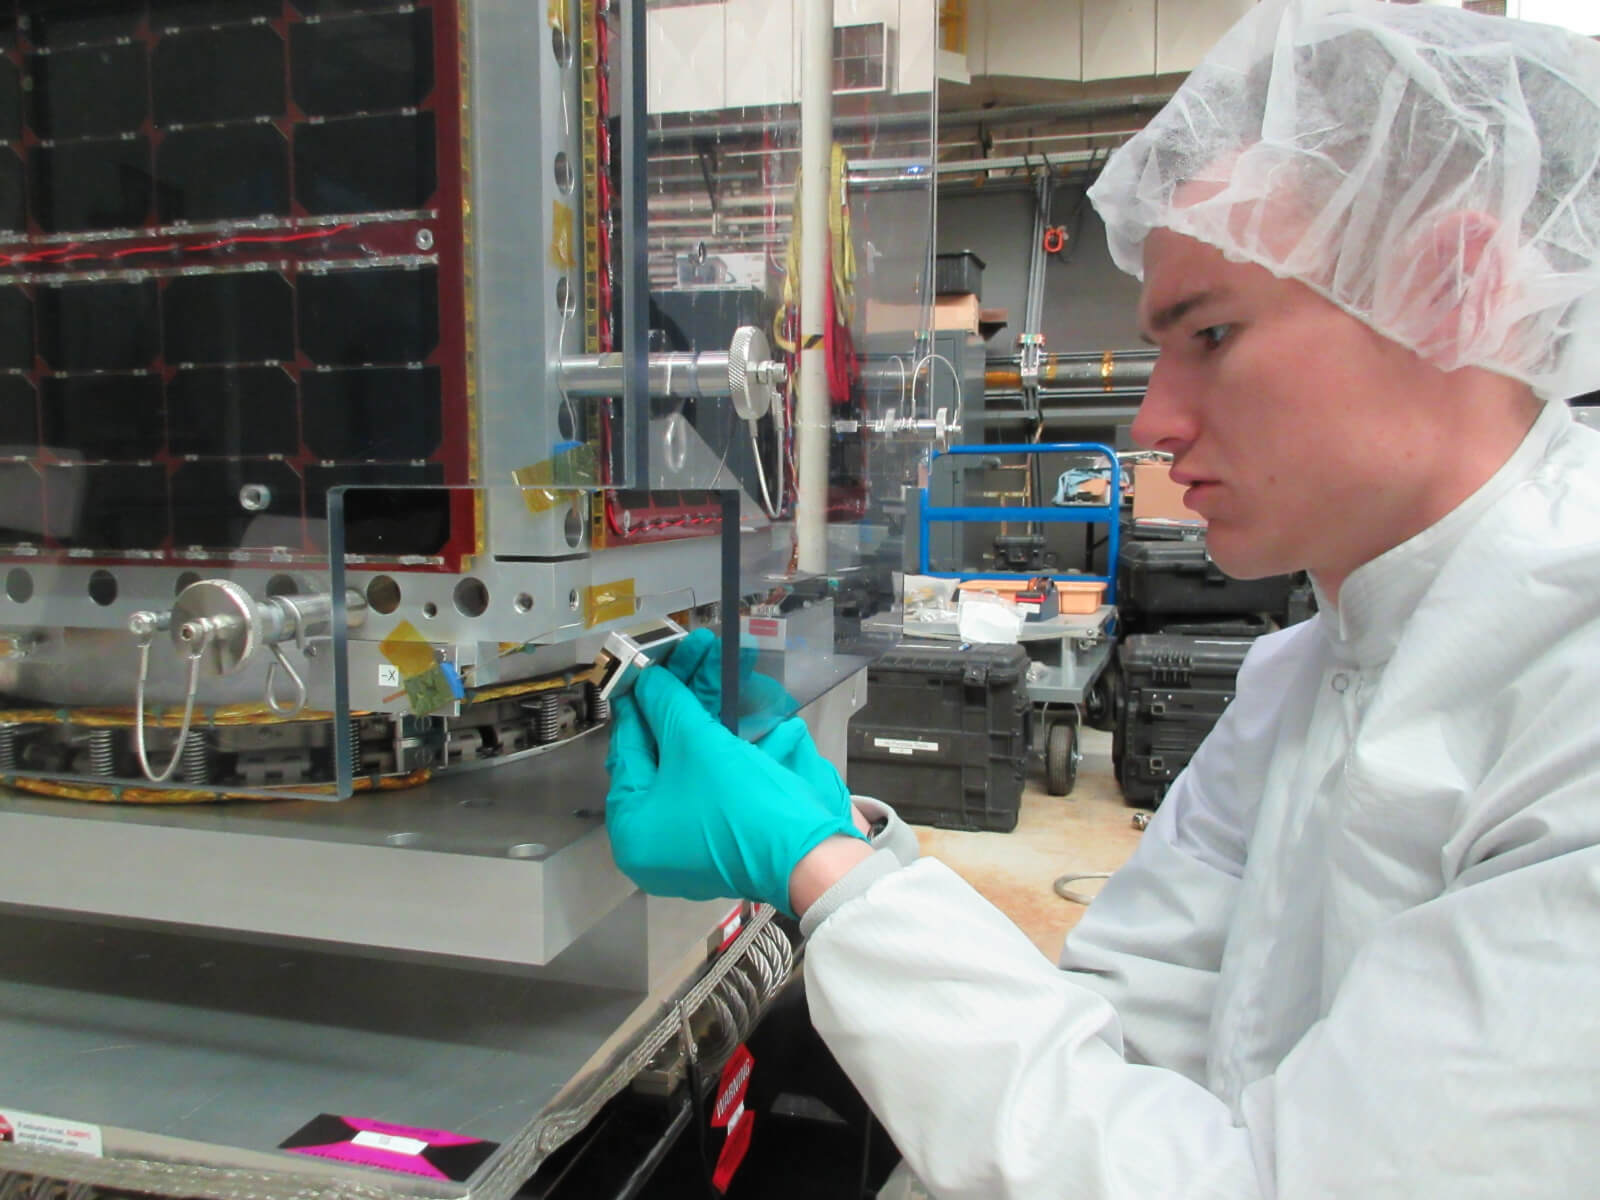 Cadet working in lab, FalconSAT-8